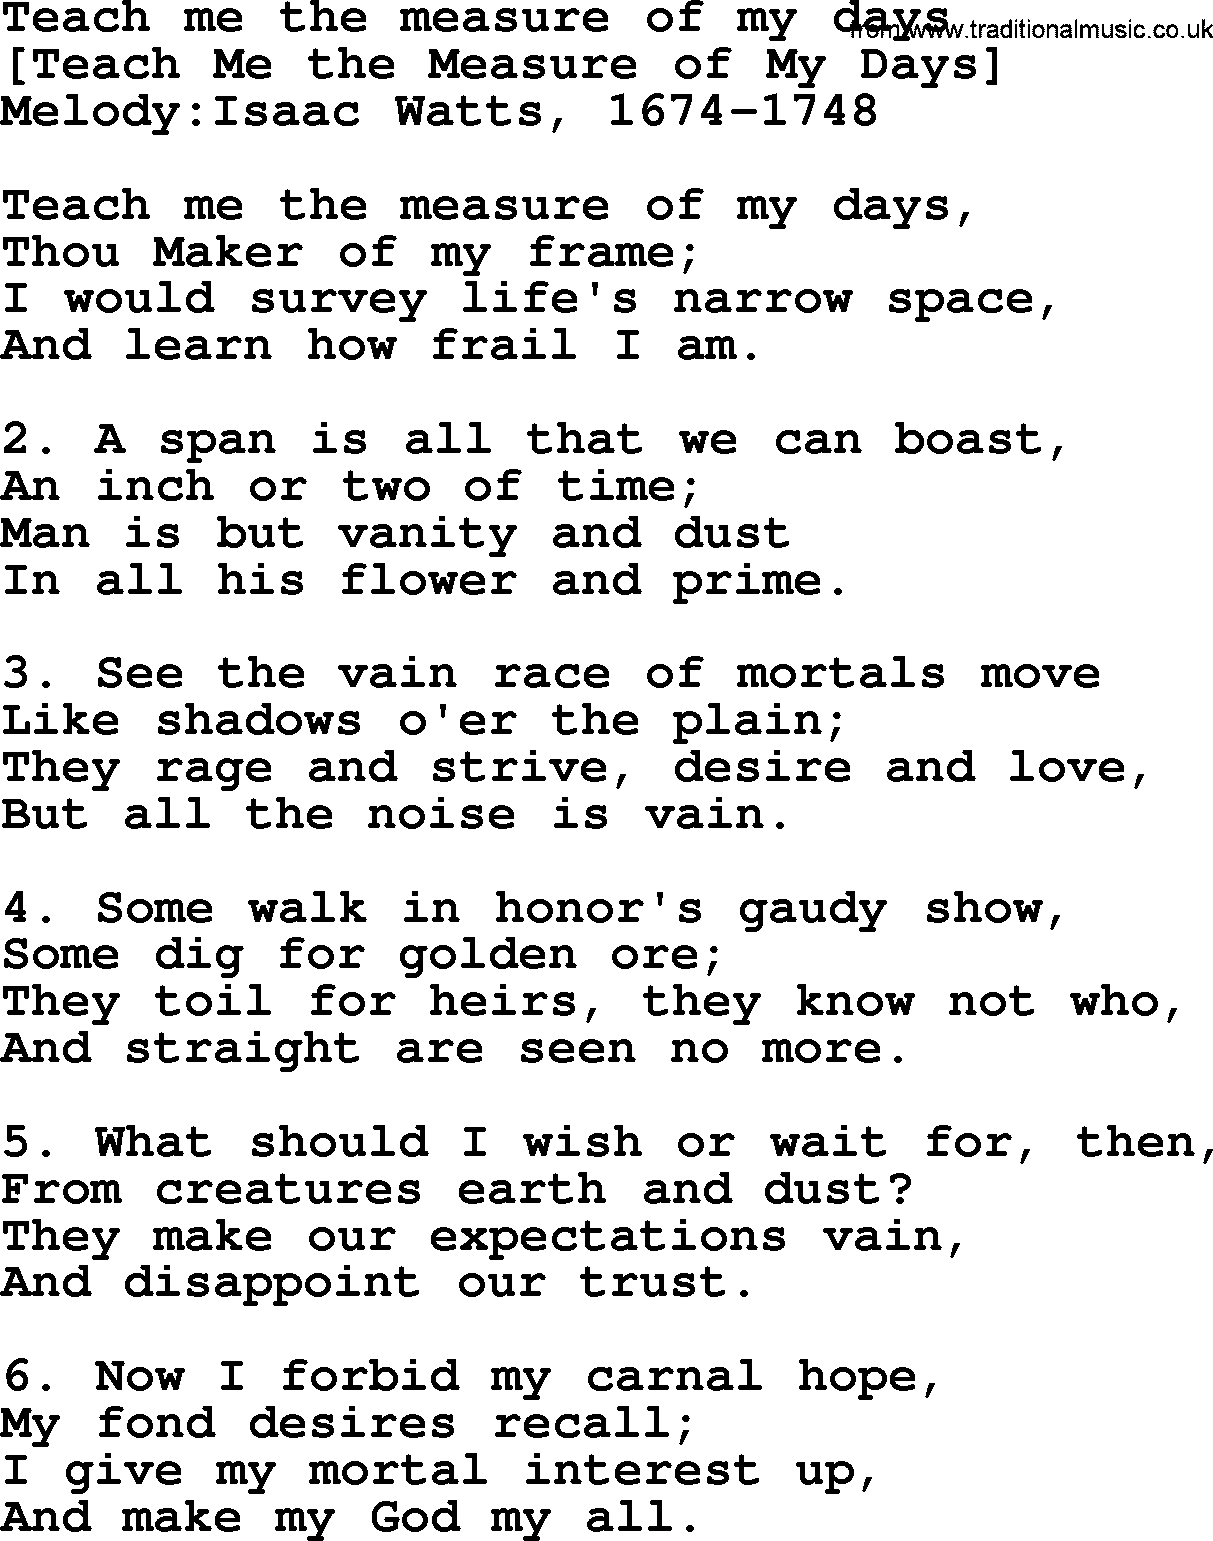 Old English Song: Teach Me The Measure Of My Days lyrics